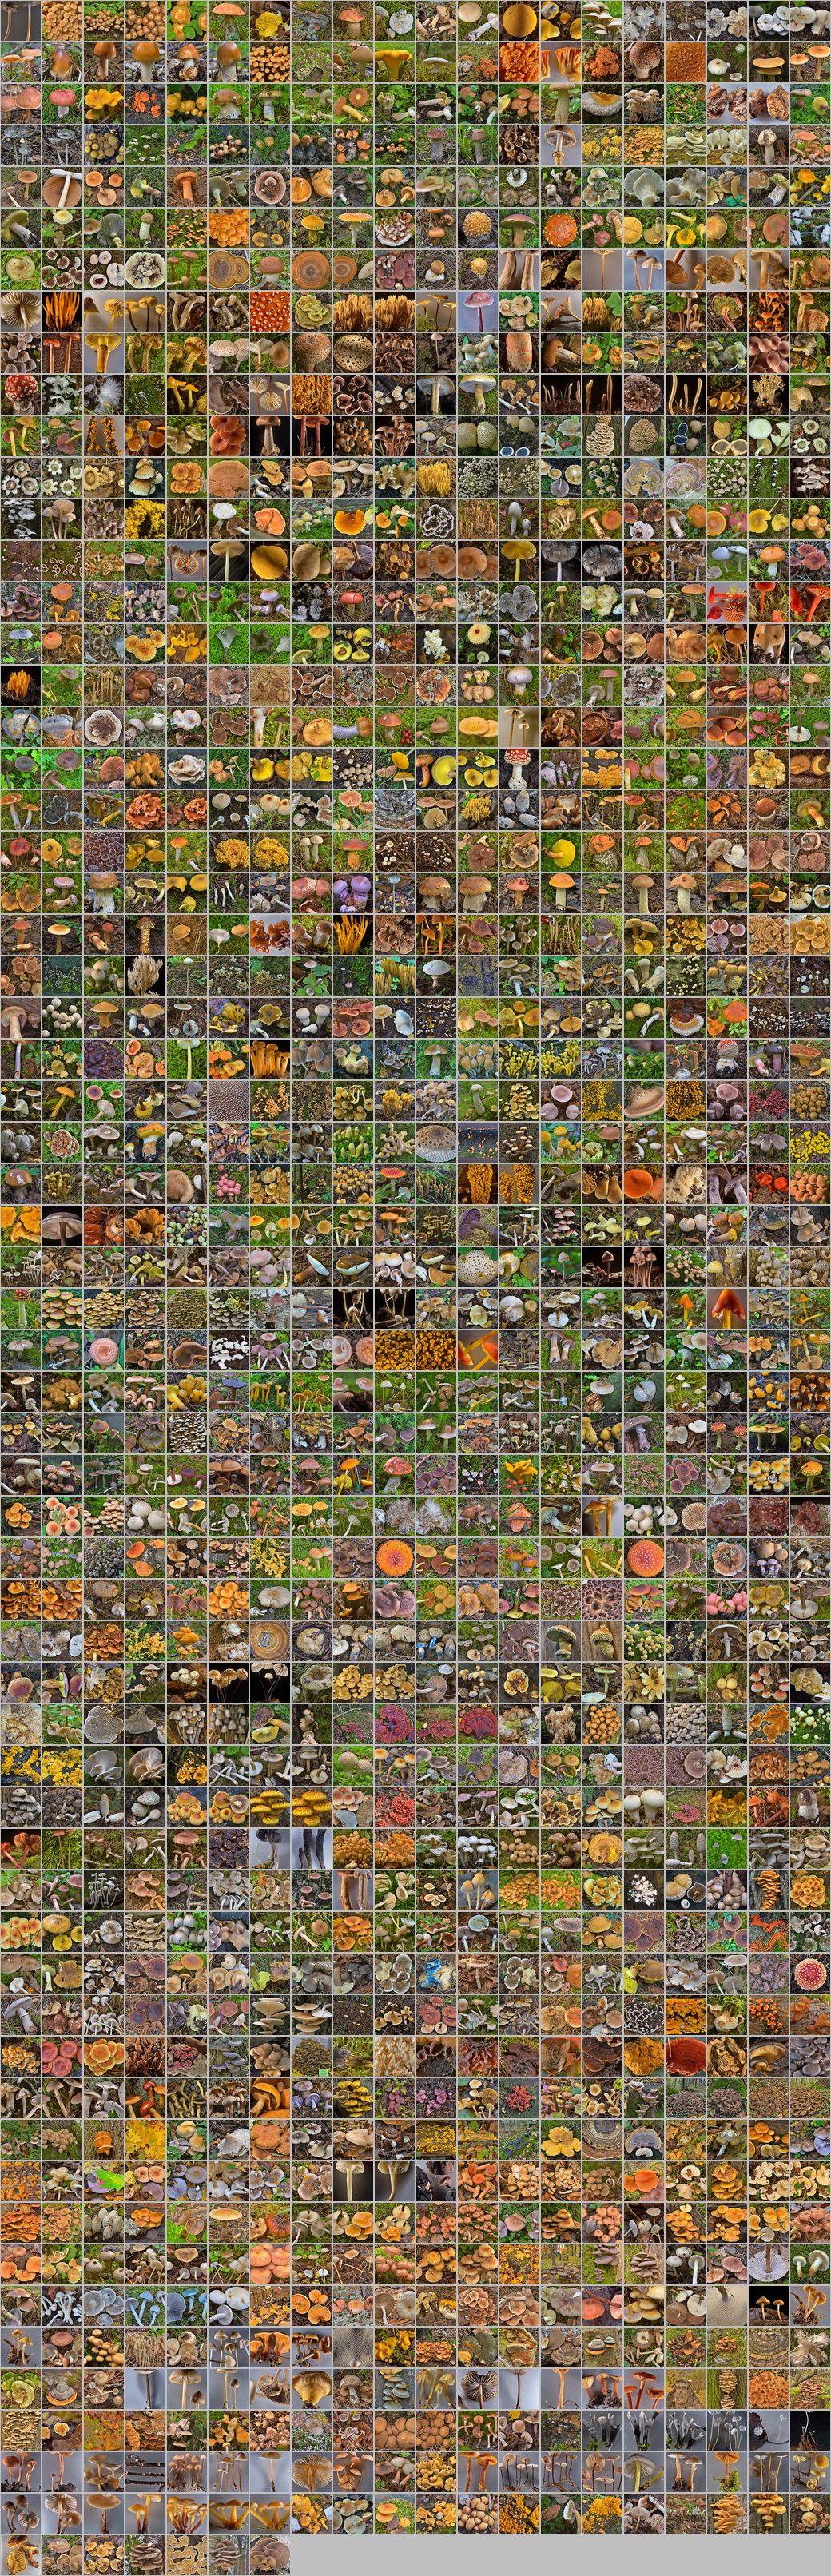 Photomontage of pictures of mushrooms in Russia. Year 2016